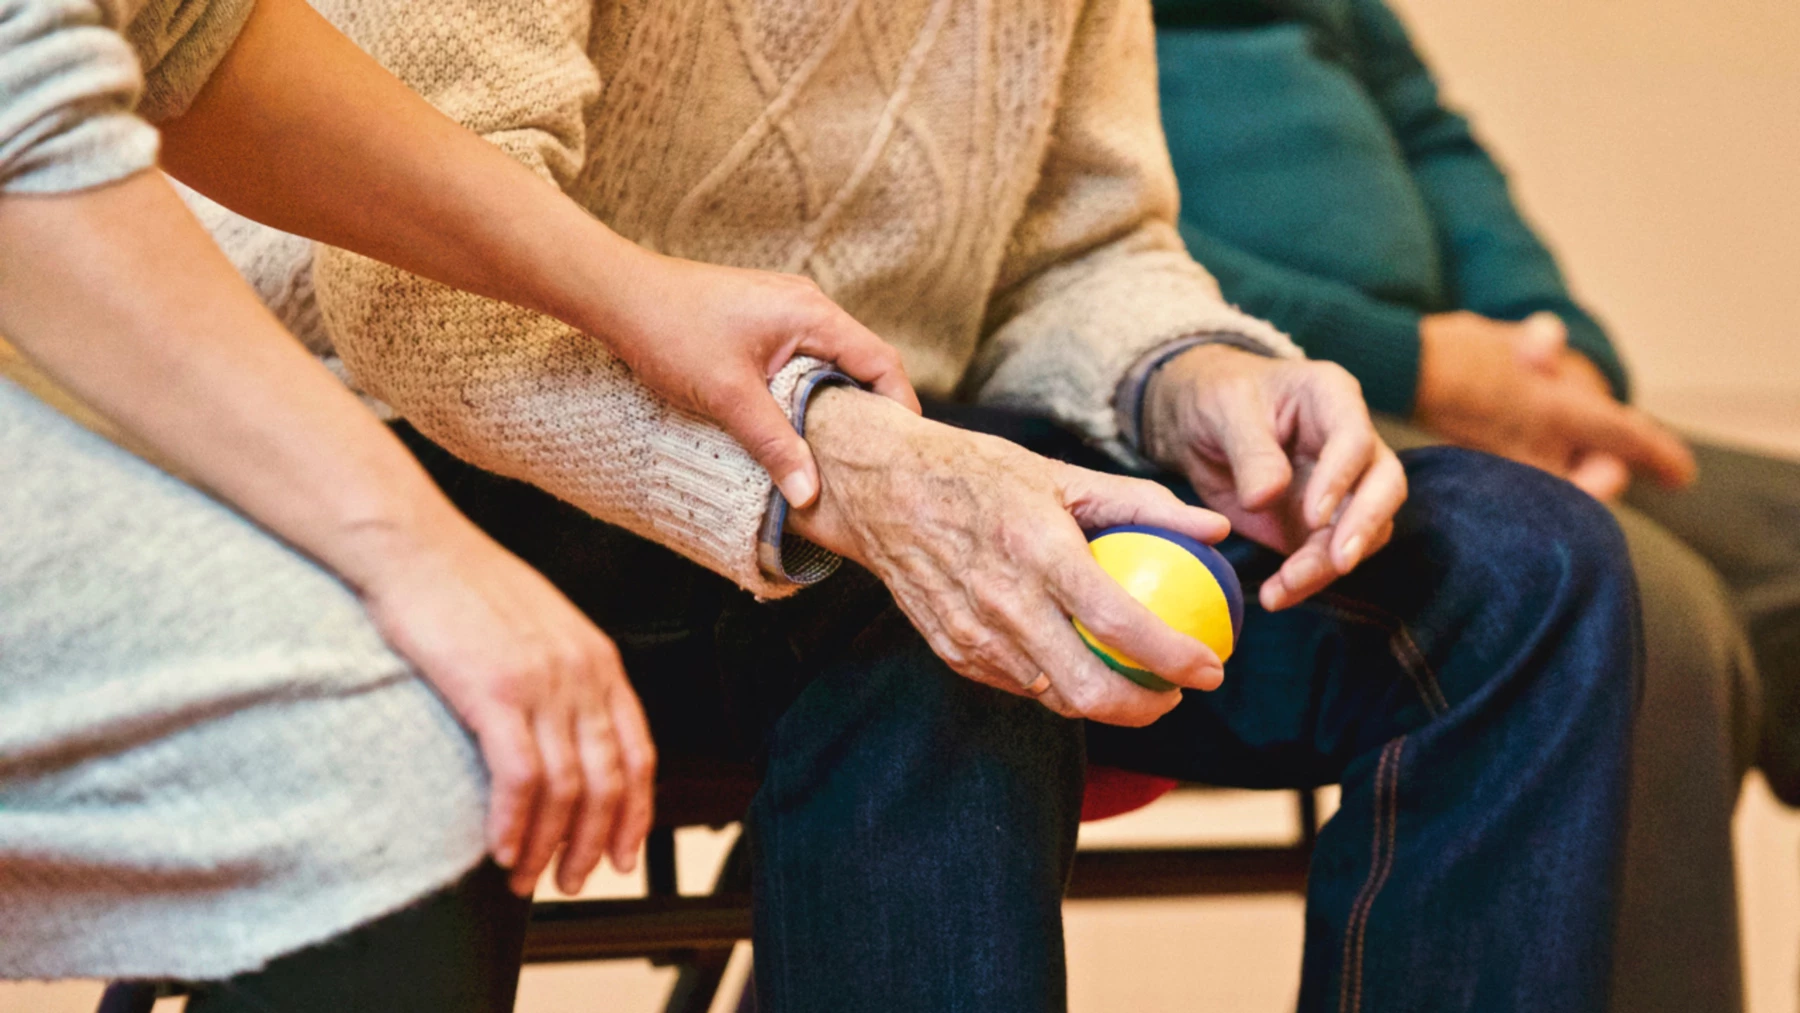 A care worker helping an elderly person exercise their hands with a ball